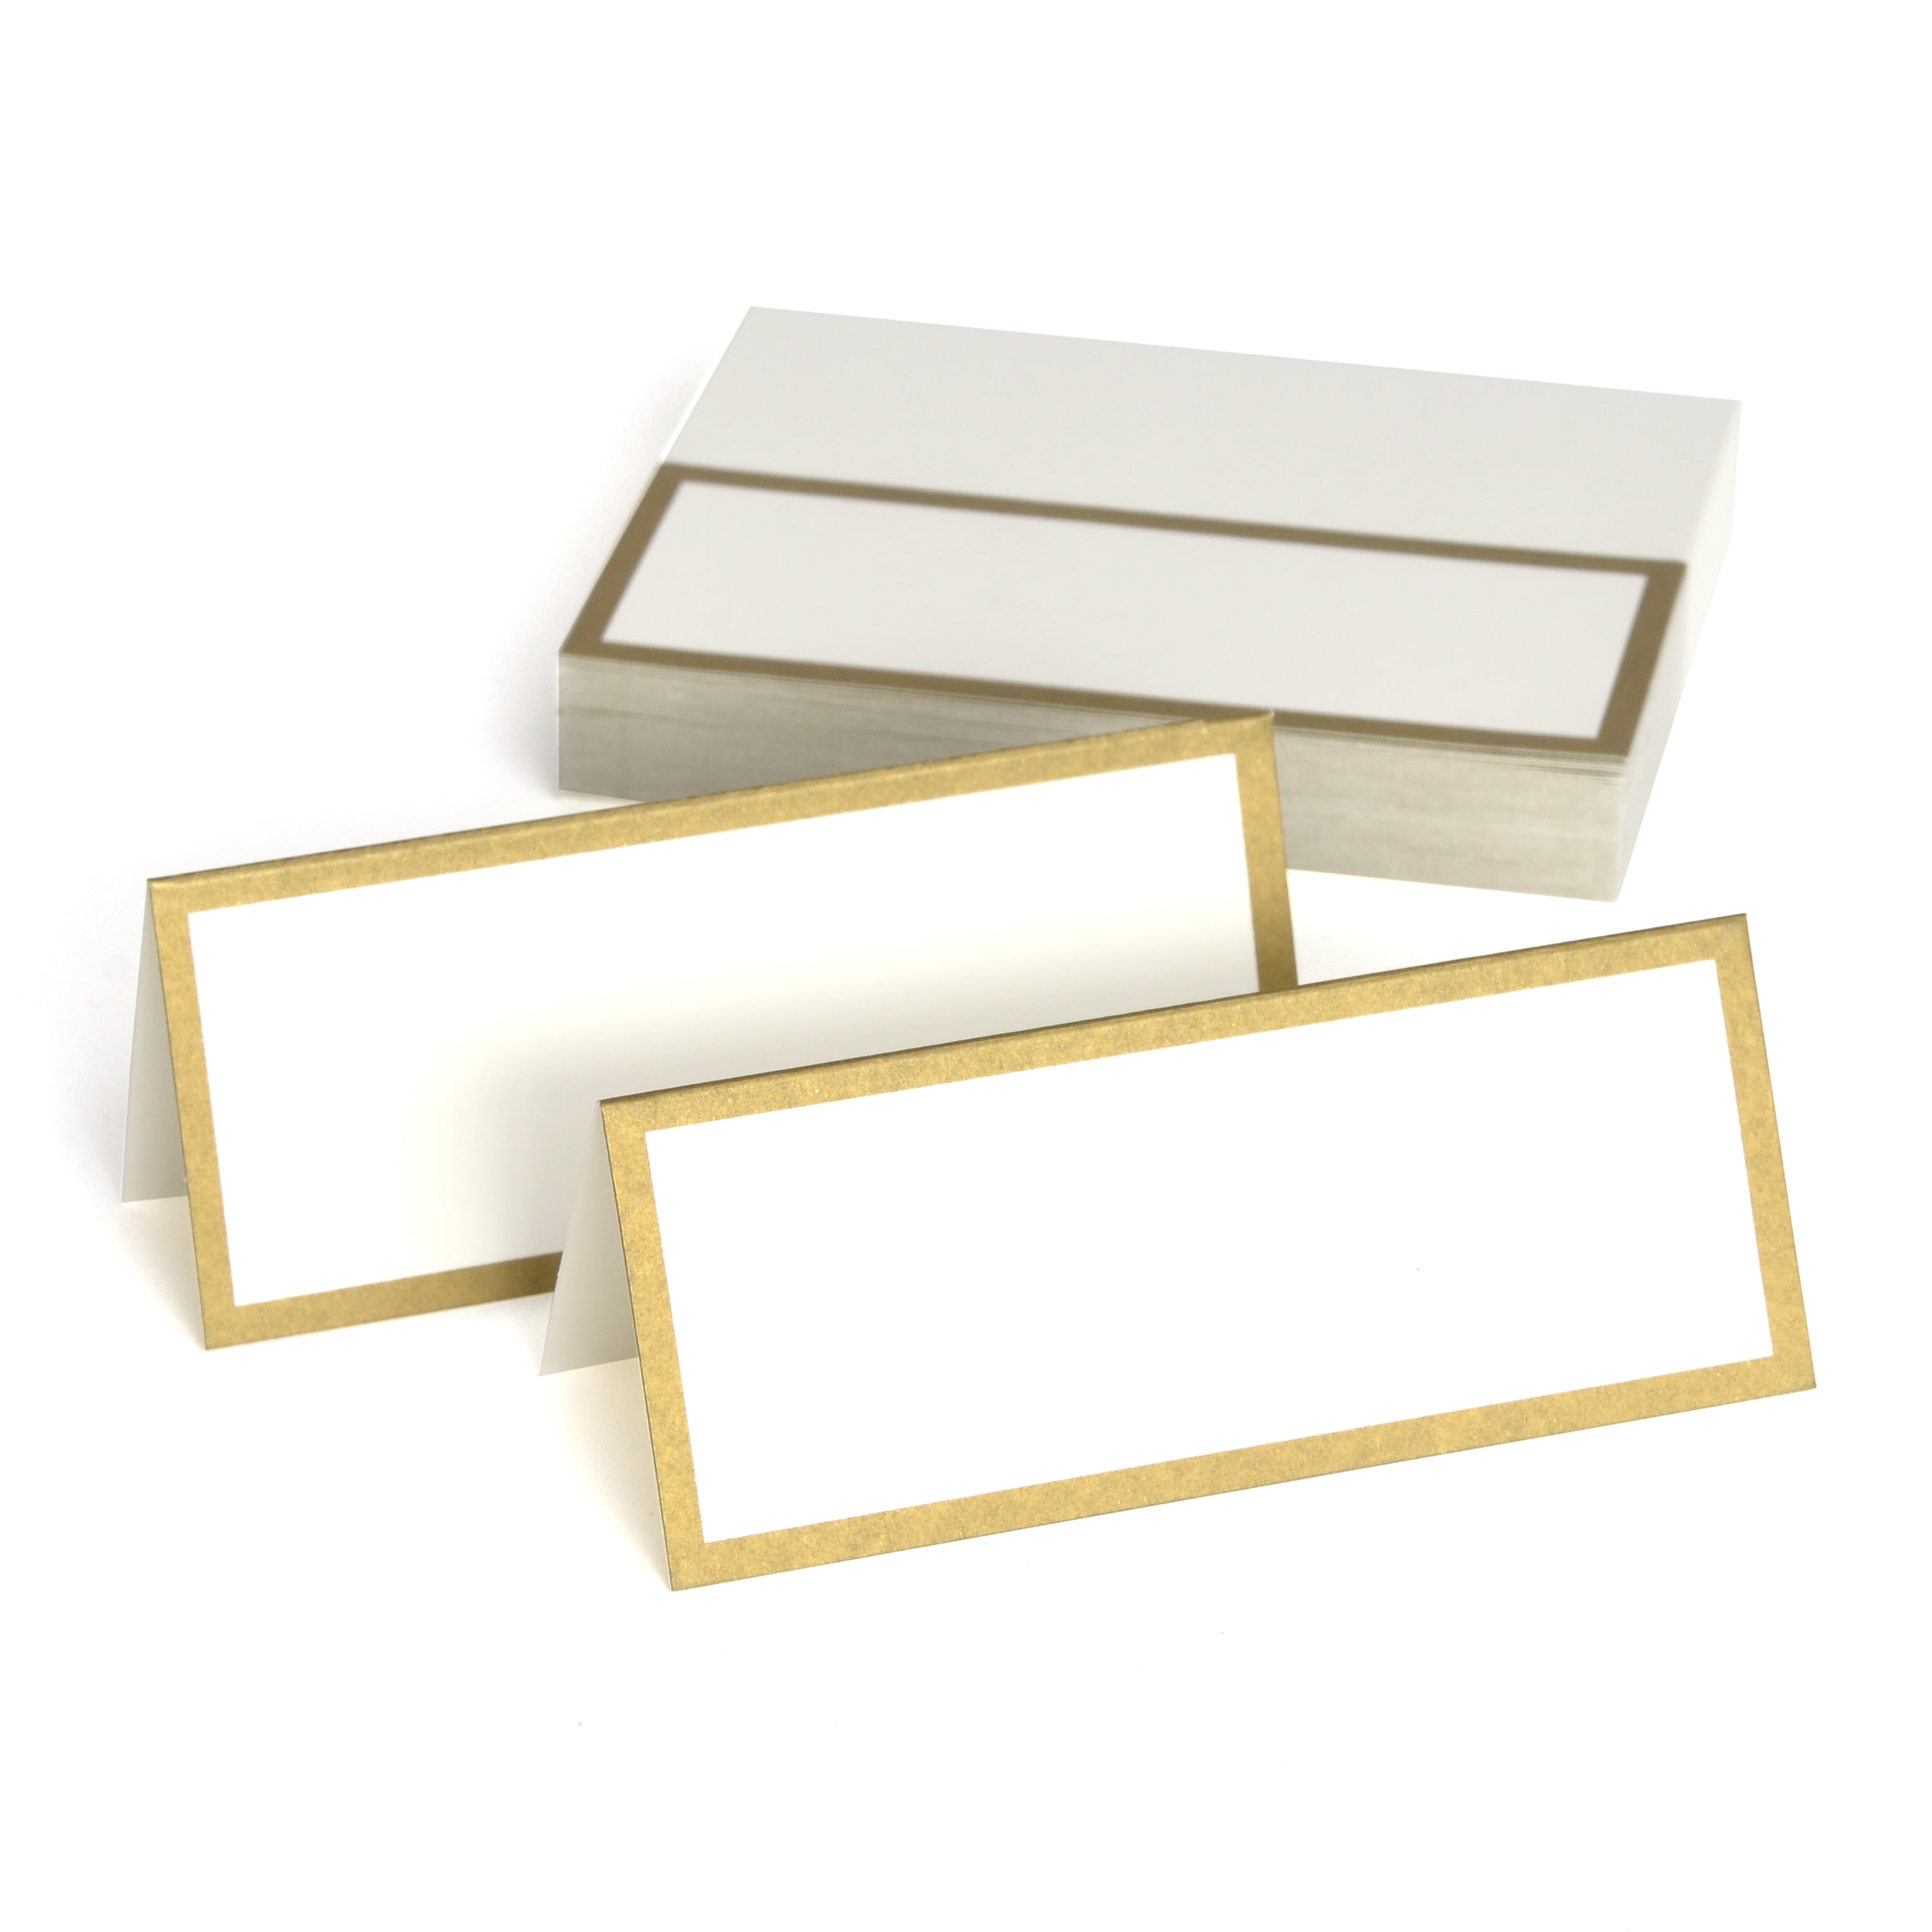 Way to Celebrate Gold Wedding Place Cards, 24 Count - Walmart.com With Celebrate It Templates Place Cards